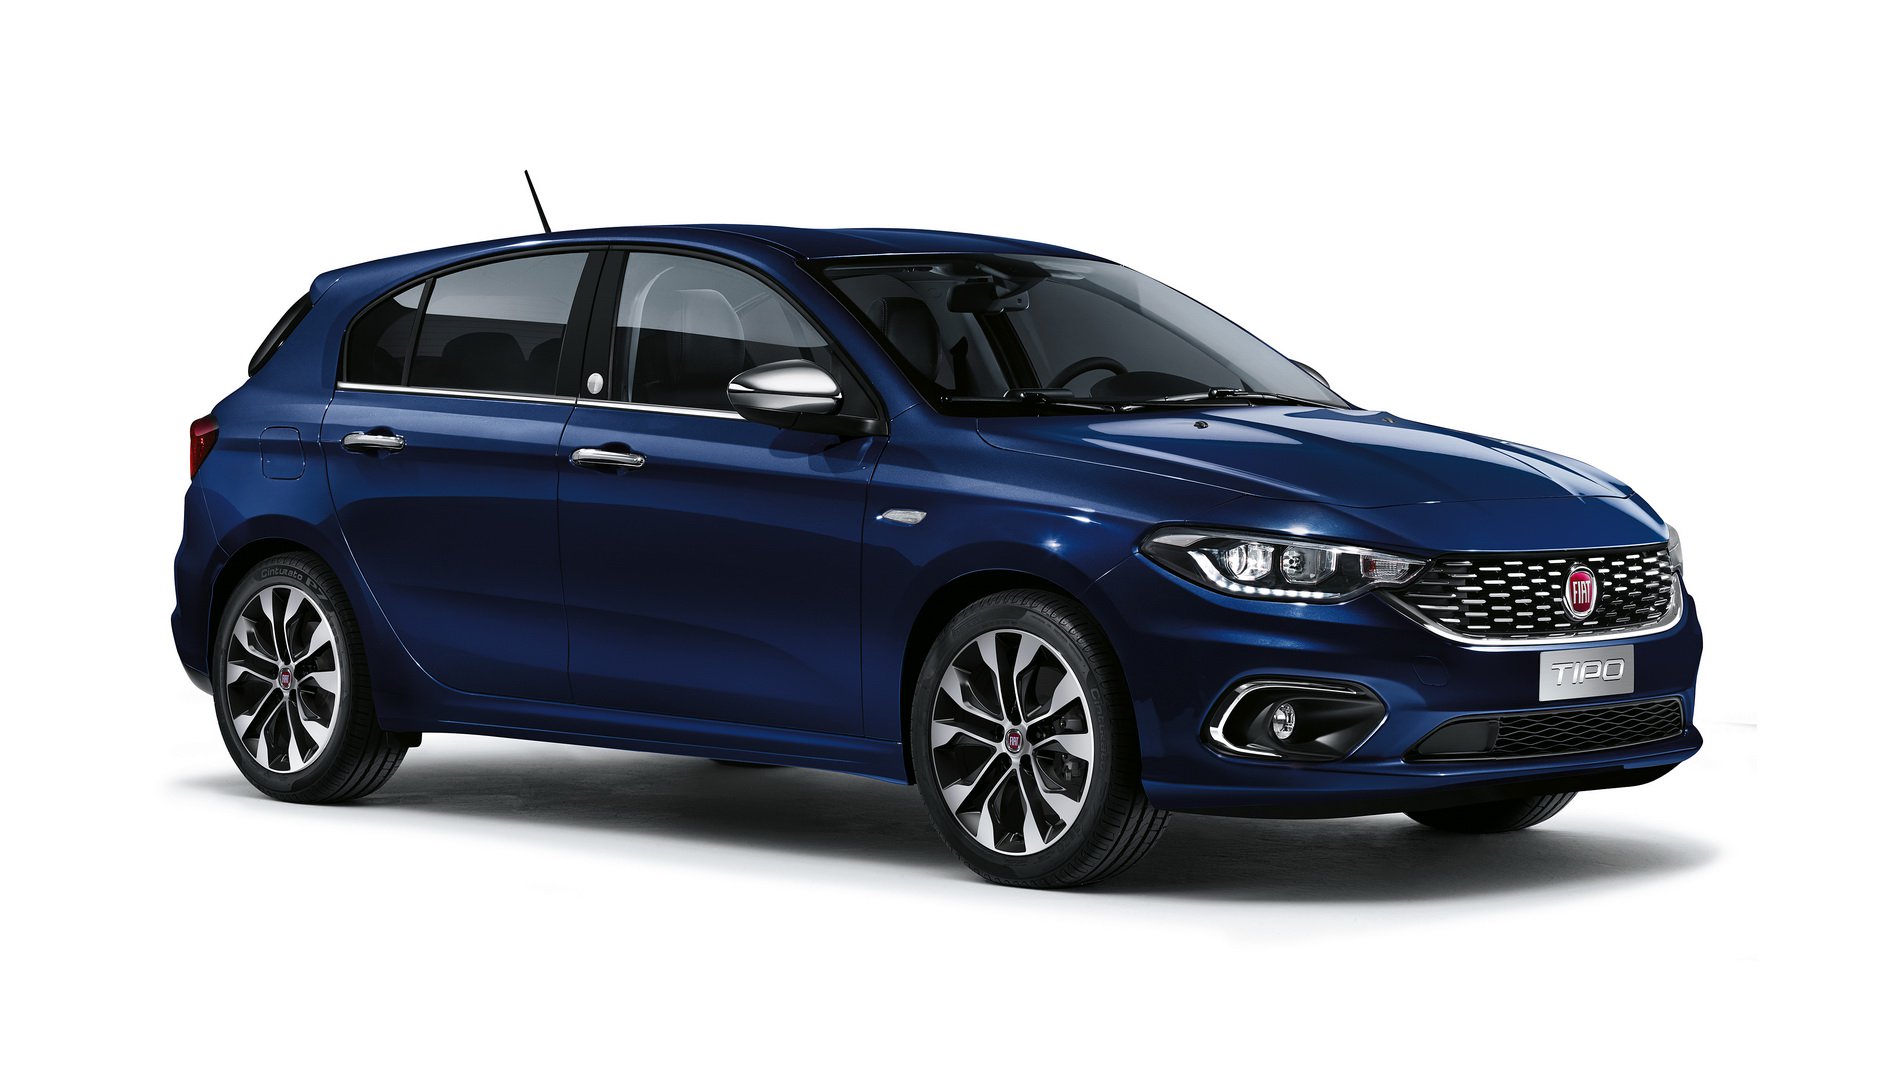 Mirror, Street Versions Added To 2019 Fiat Tipo Lineup In